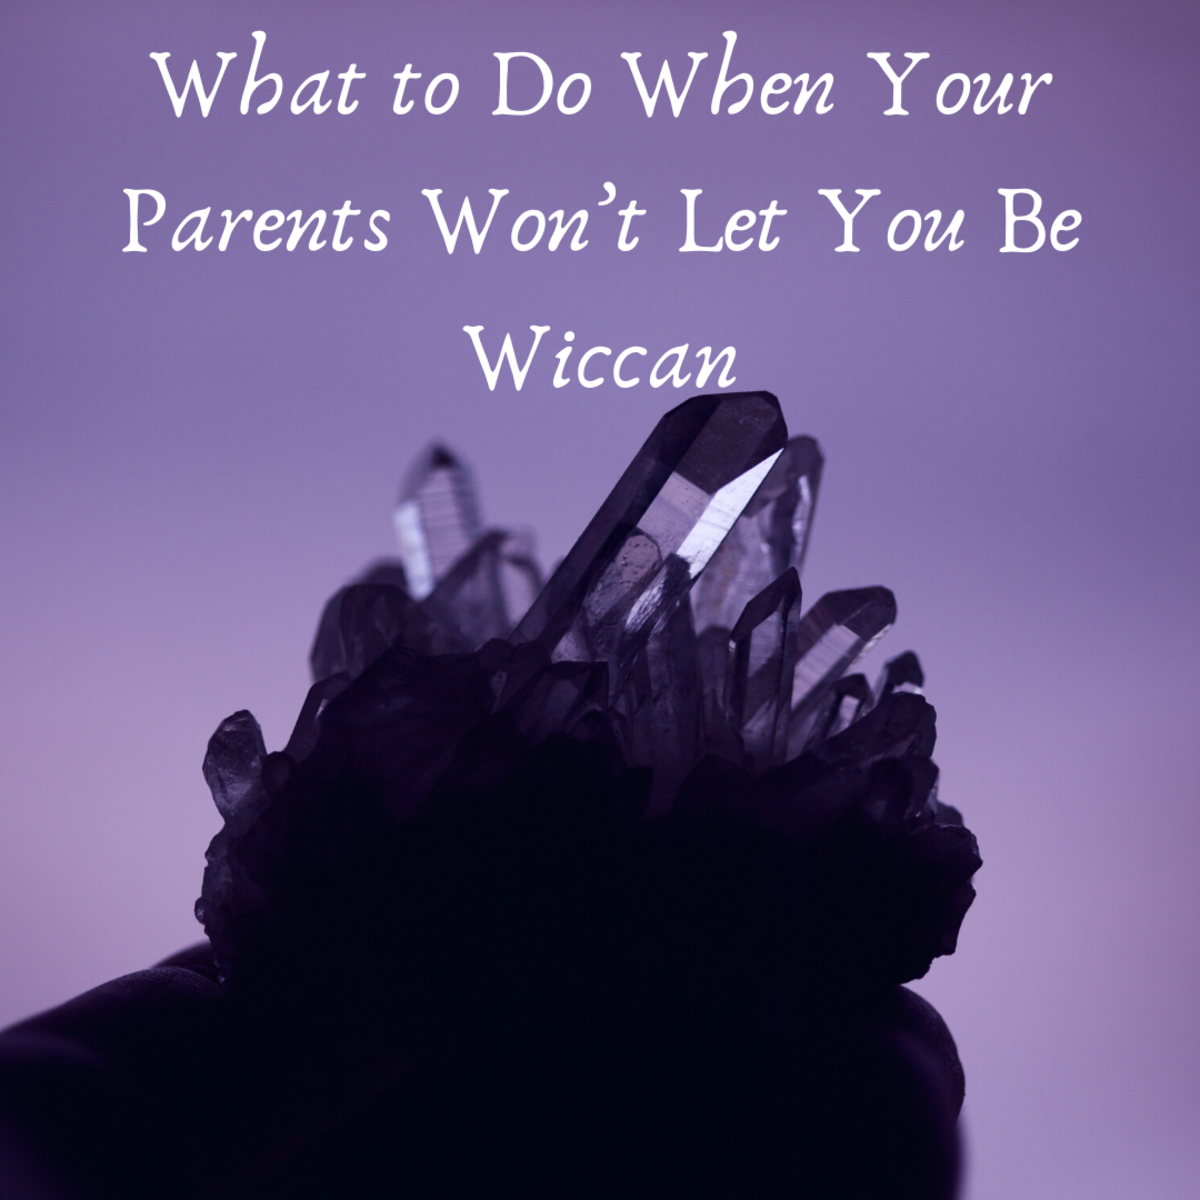 Teen Wiccans: What to Do When Your Parents Won’t Let You Be Wiccan